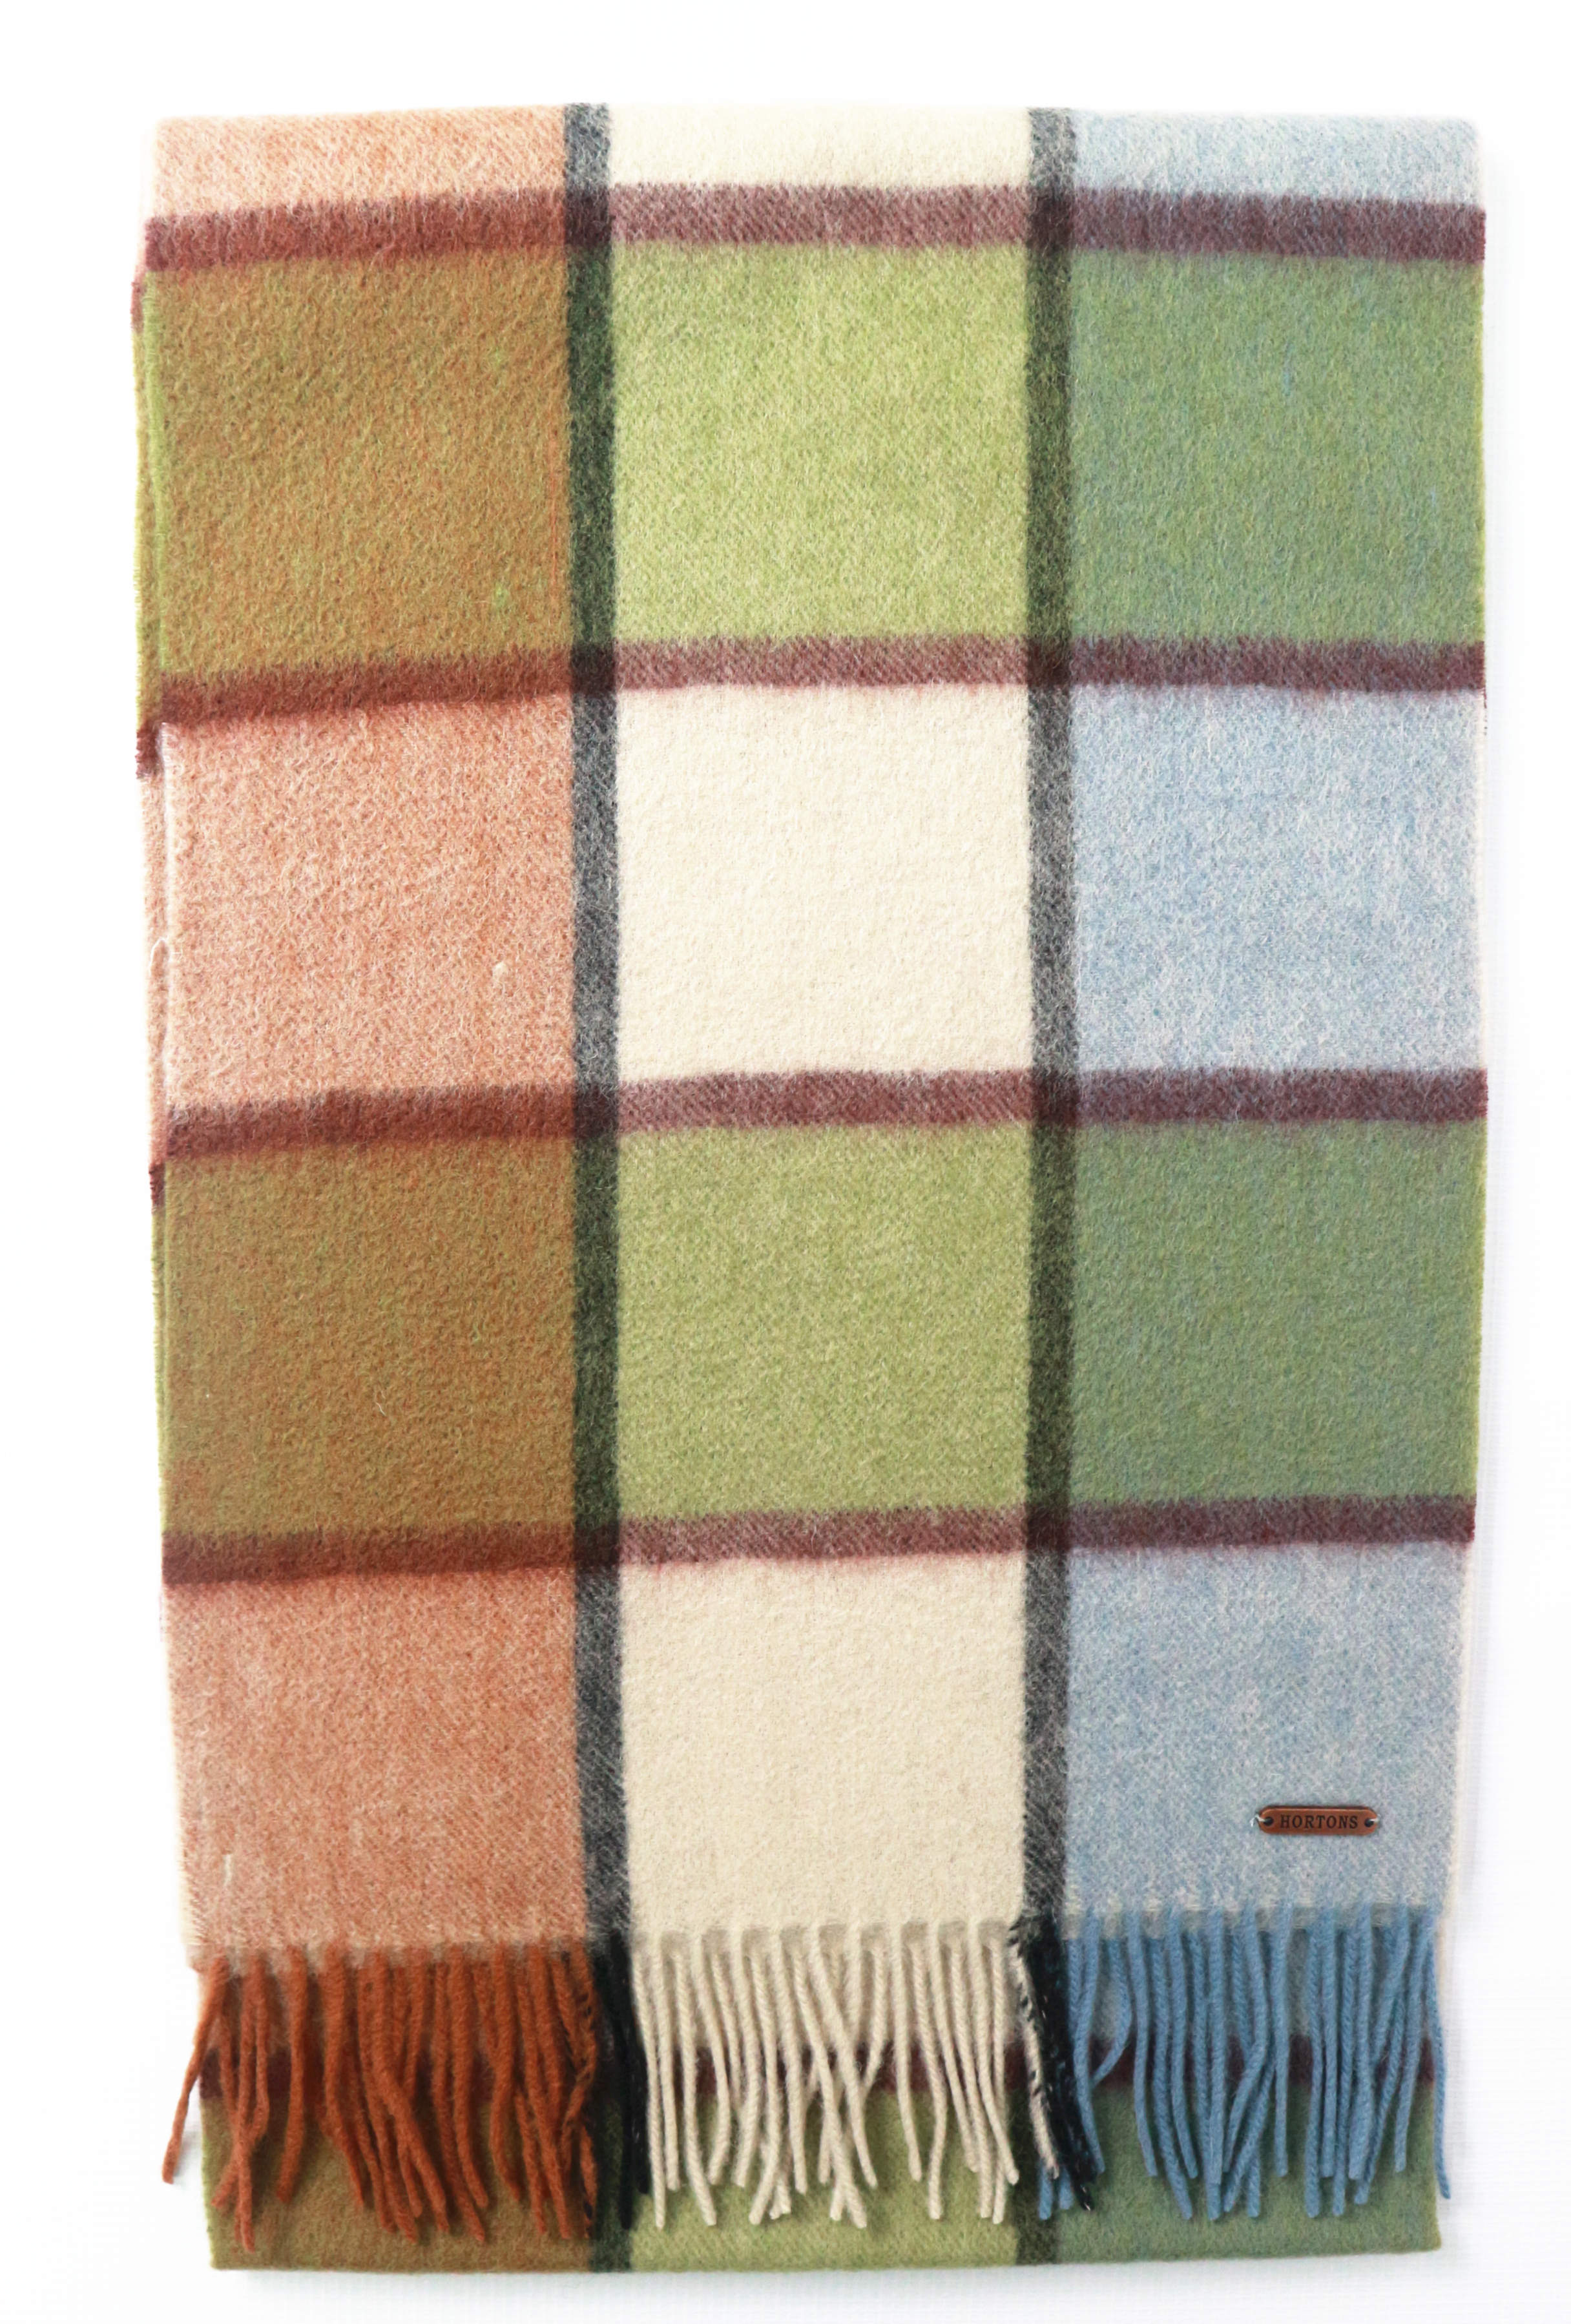 Hortons England 100% Lambswool 'Hexham' Scarf - Patch Check